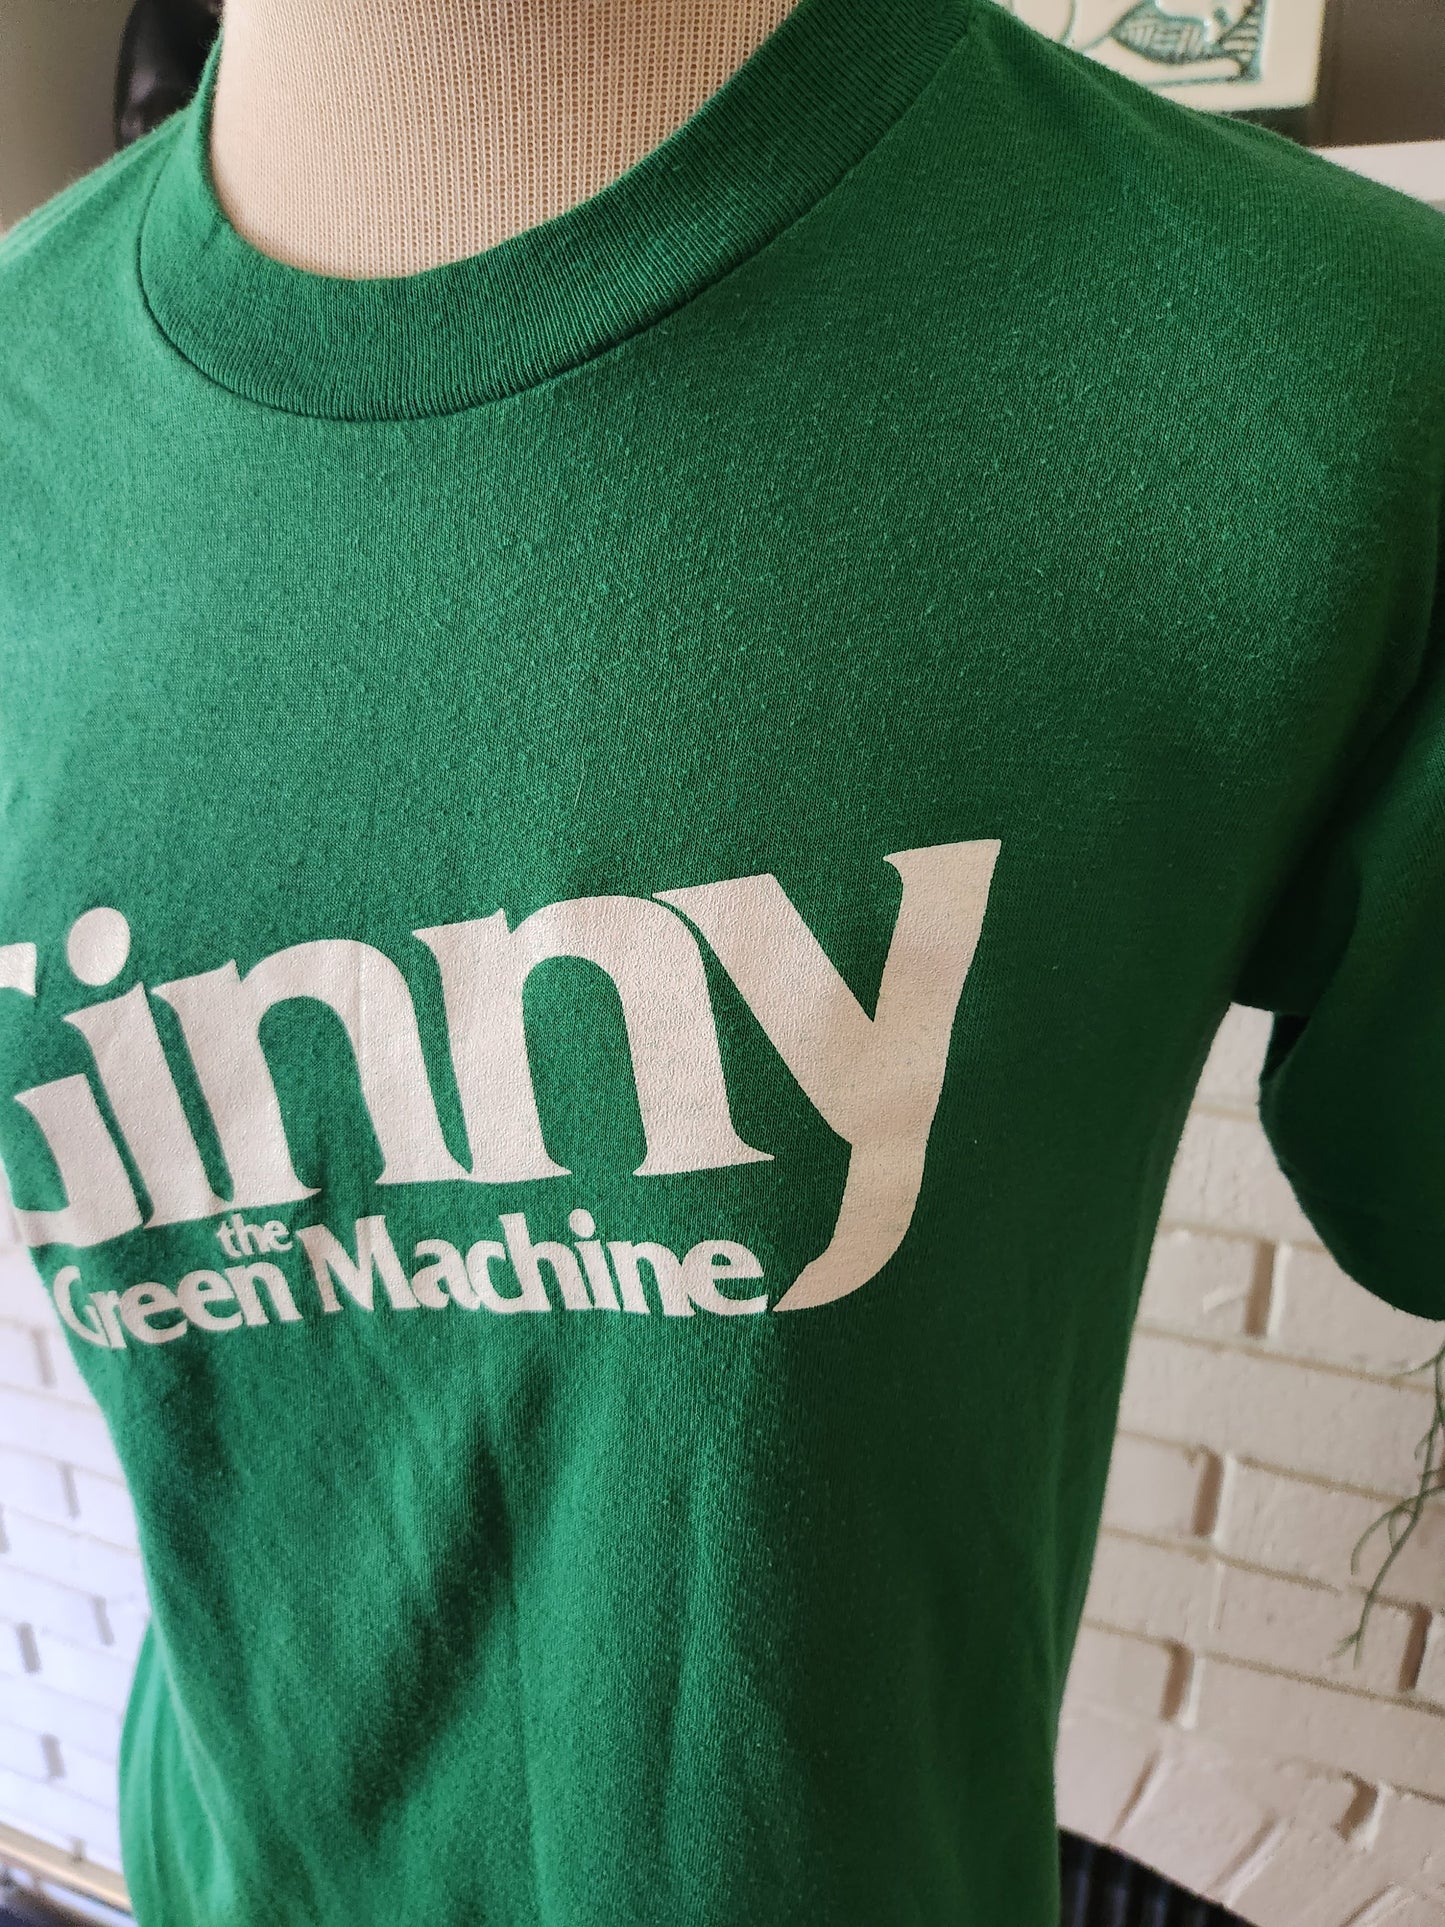 Vintage Ginny the Green Machine T Shirt by Stedman